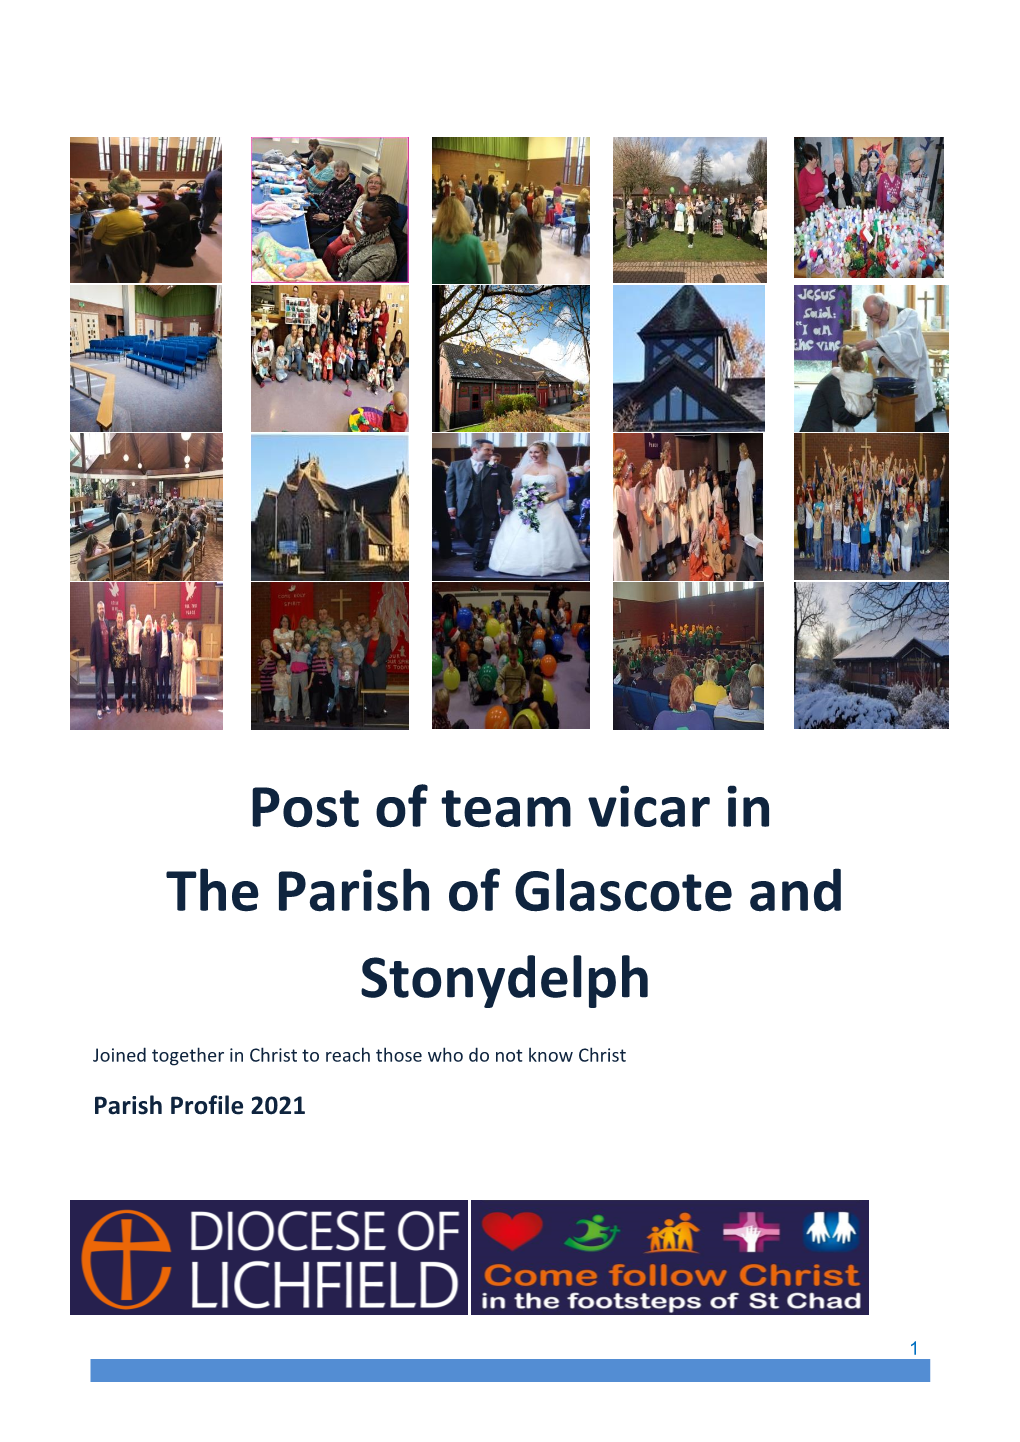 Post of Team Vicar in the Parish of Glascote and Stonydelph